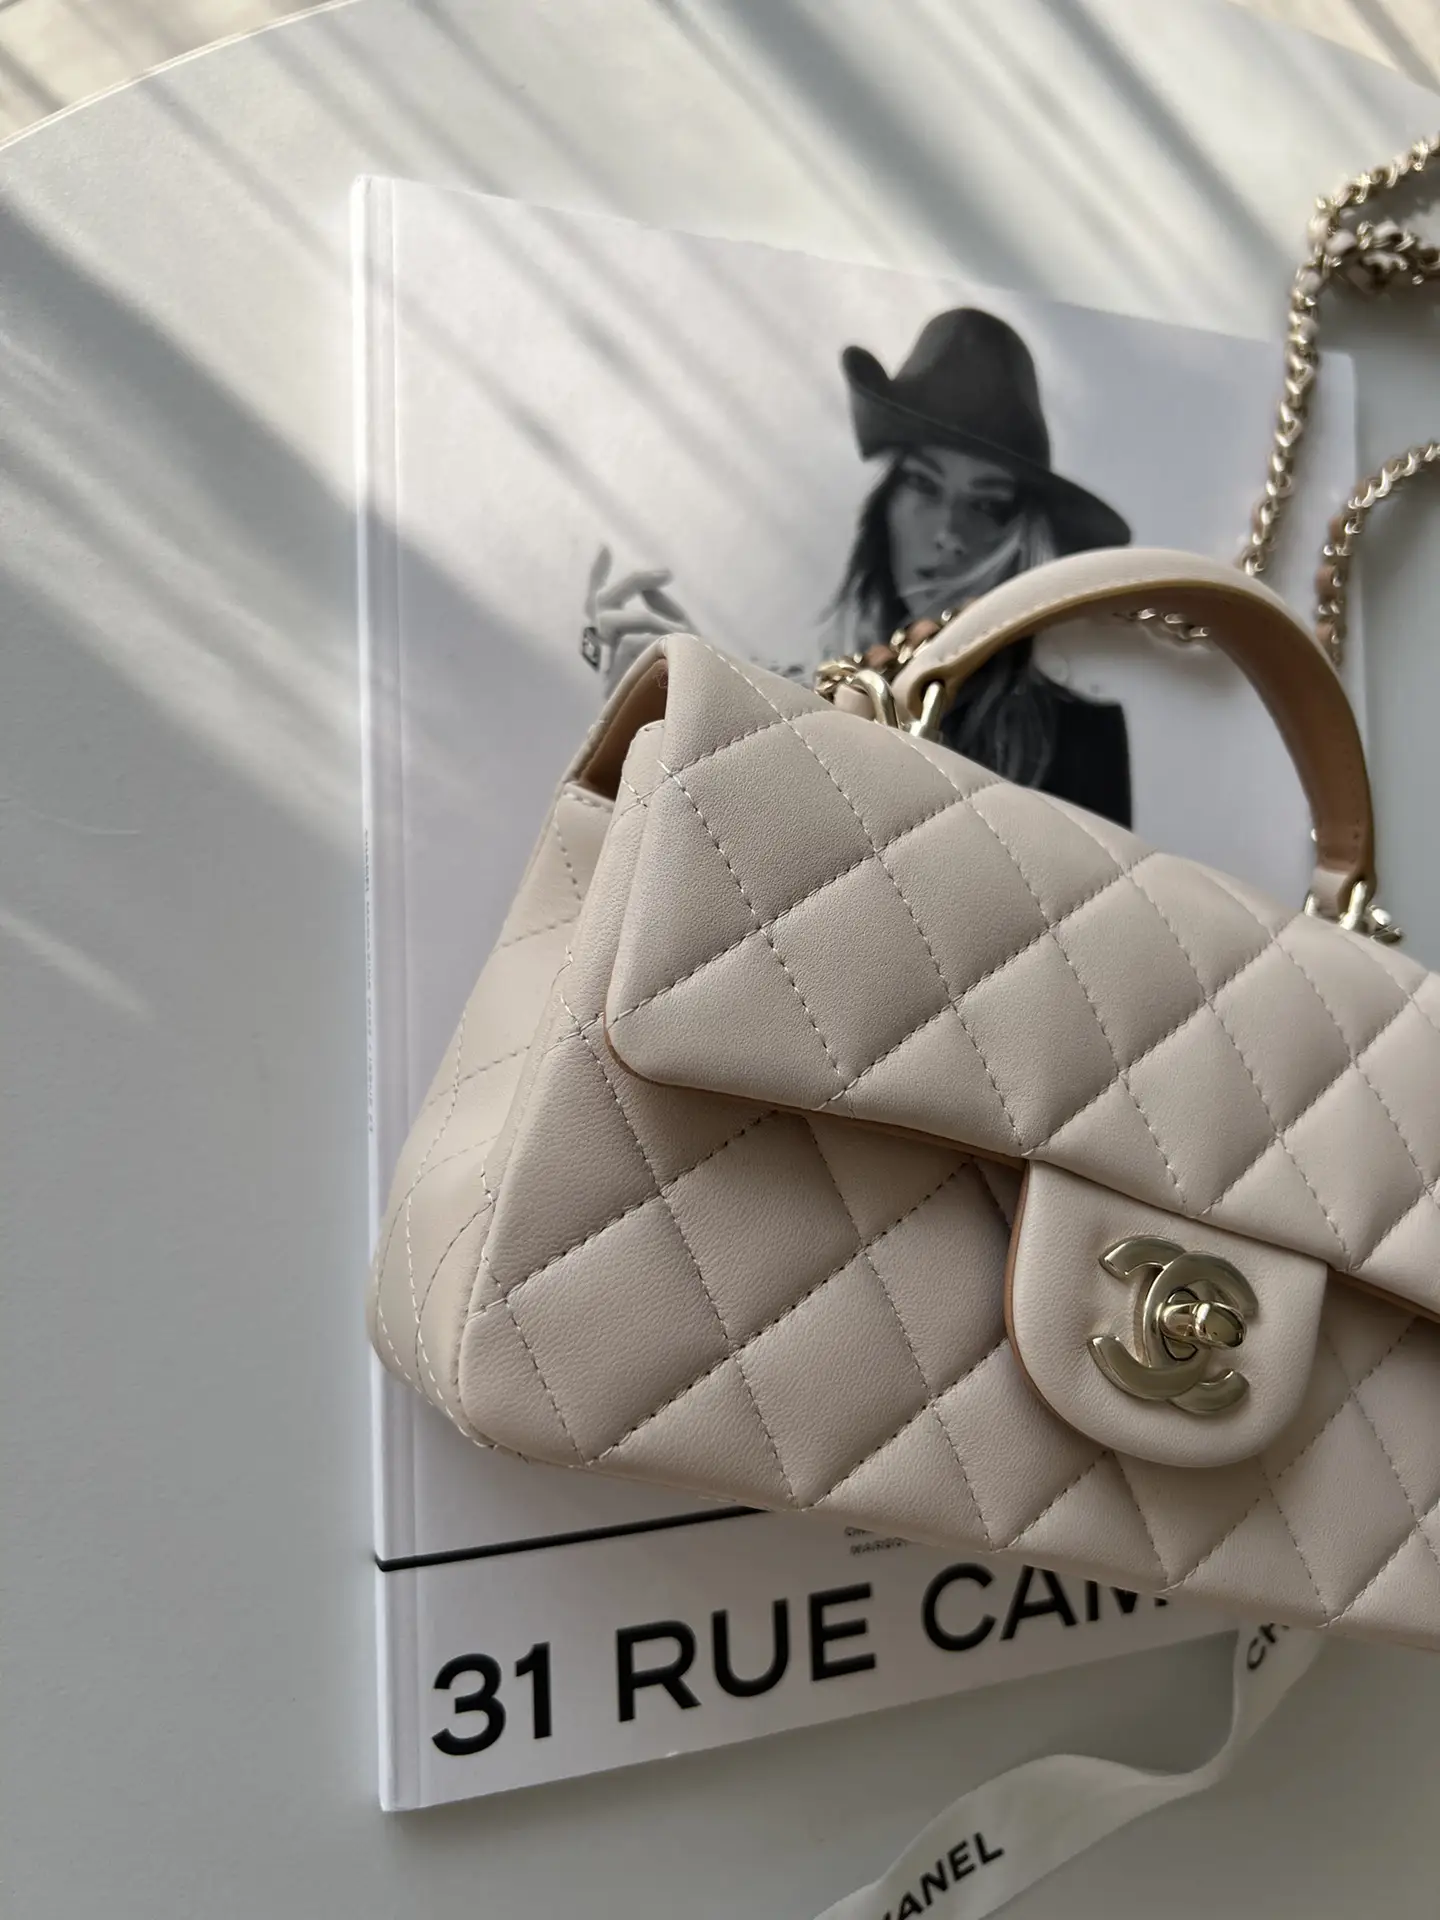 Chanel 22C Beige Lambskin Mini Rectangular Bag, Gallery posted by Zoey 💎